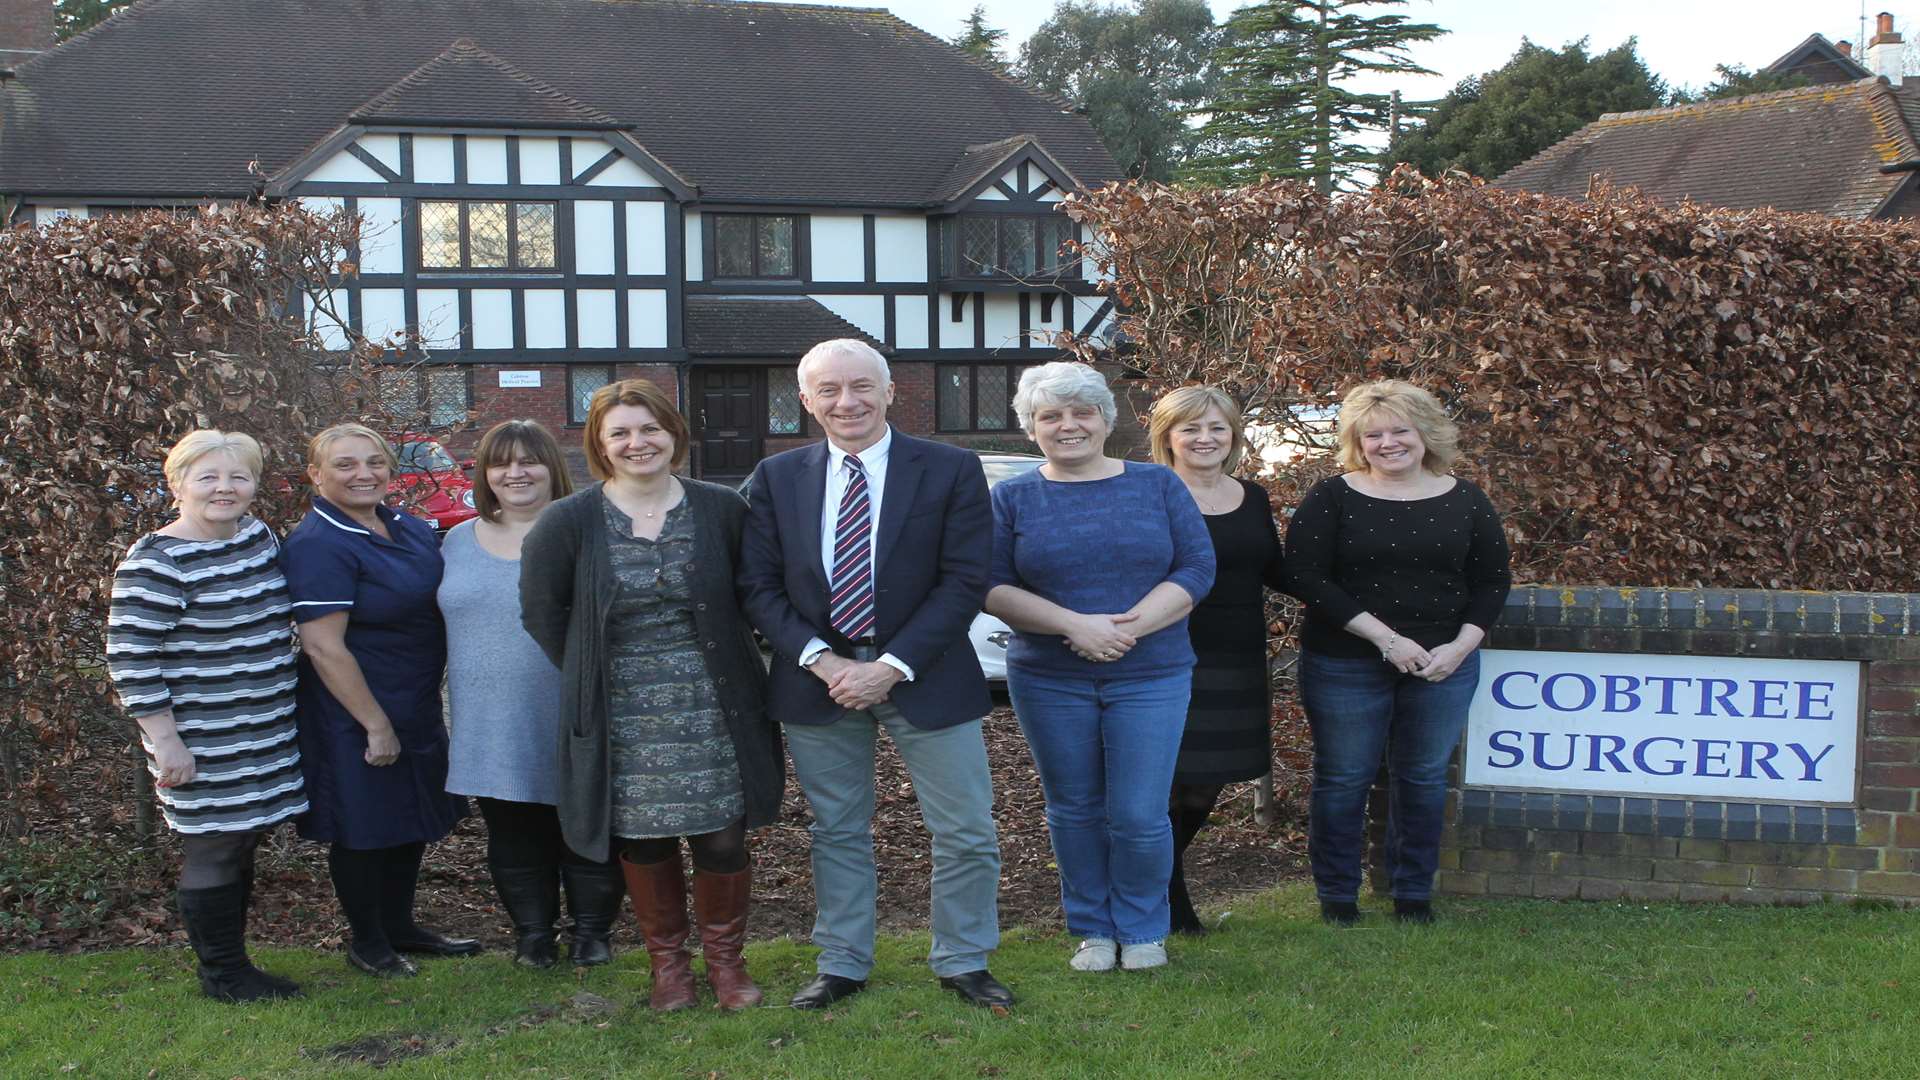 Cobtree Medical Practice staff. From left, Jean Schofield, Jackie Gillard, Mandy Goodsell, Dr Sara Butler-Gallie, Dr Michael Heber, Jane Fagg, Linda Oliver and Christine Schofield